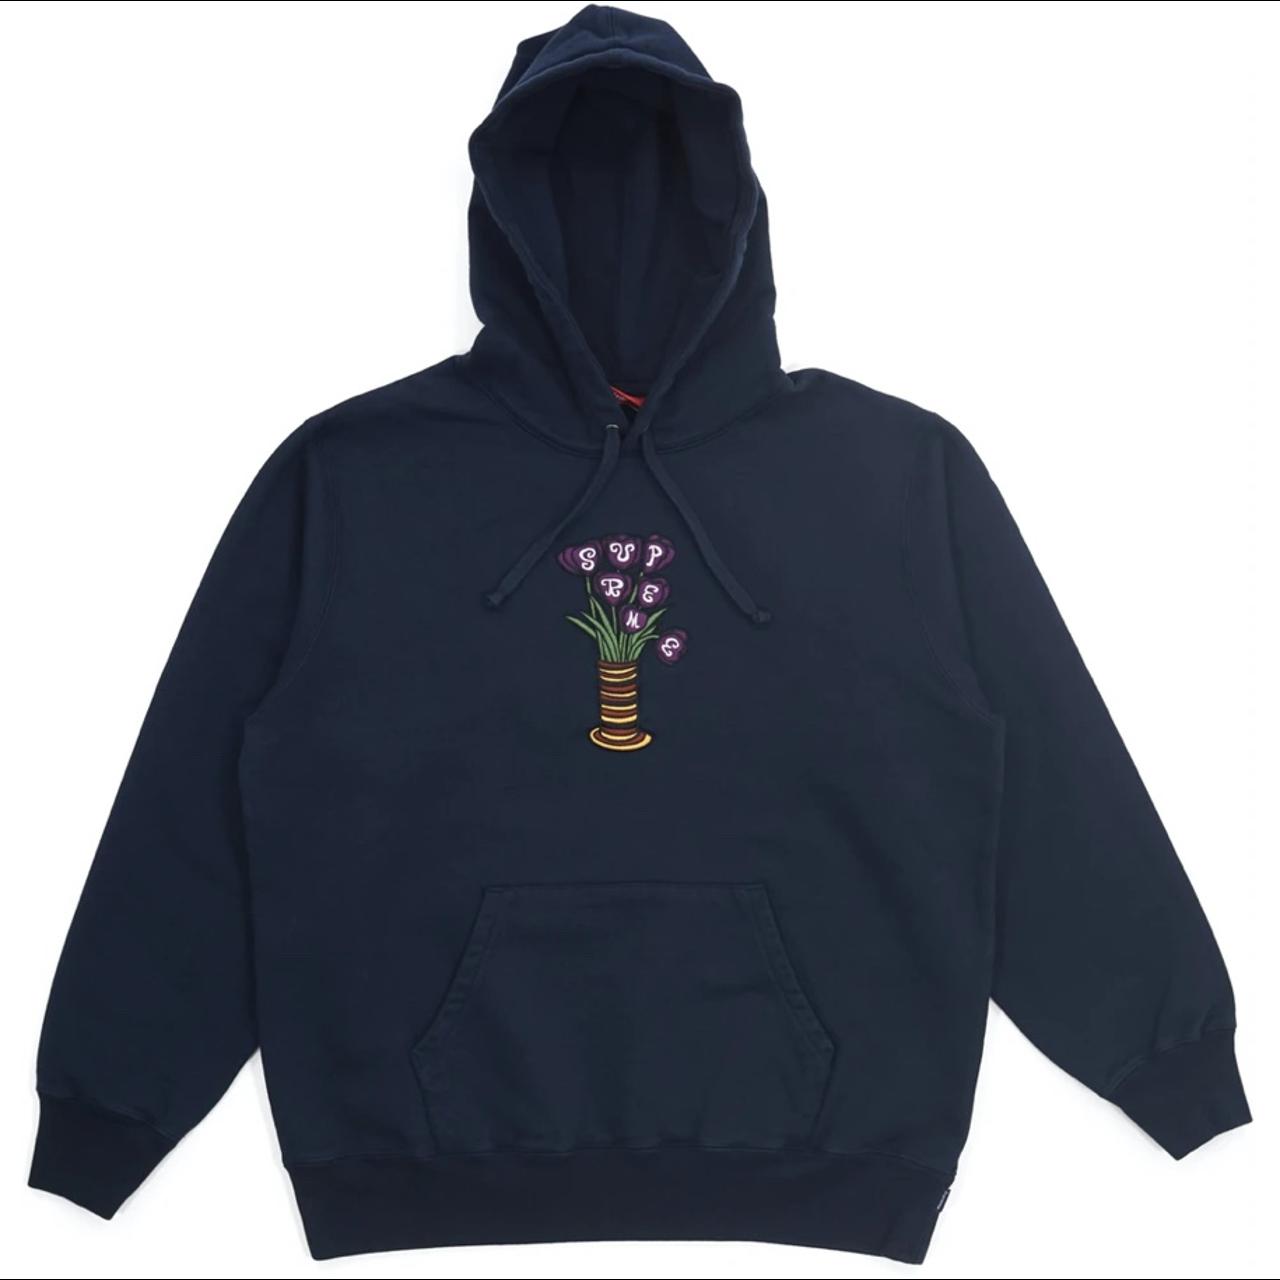 A nicer shade of navy than I expected for the hoodie : r/supremeclothing